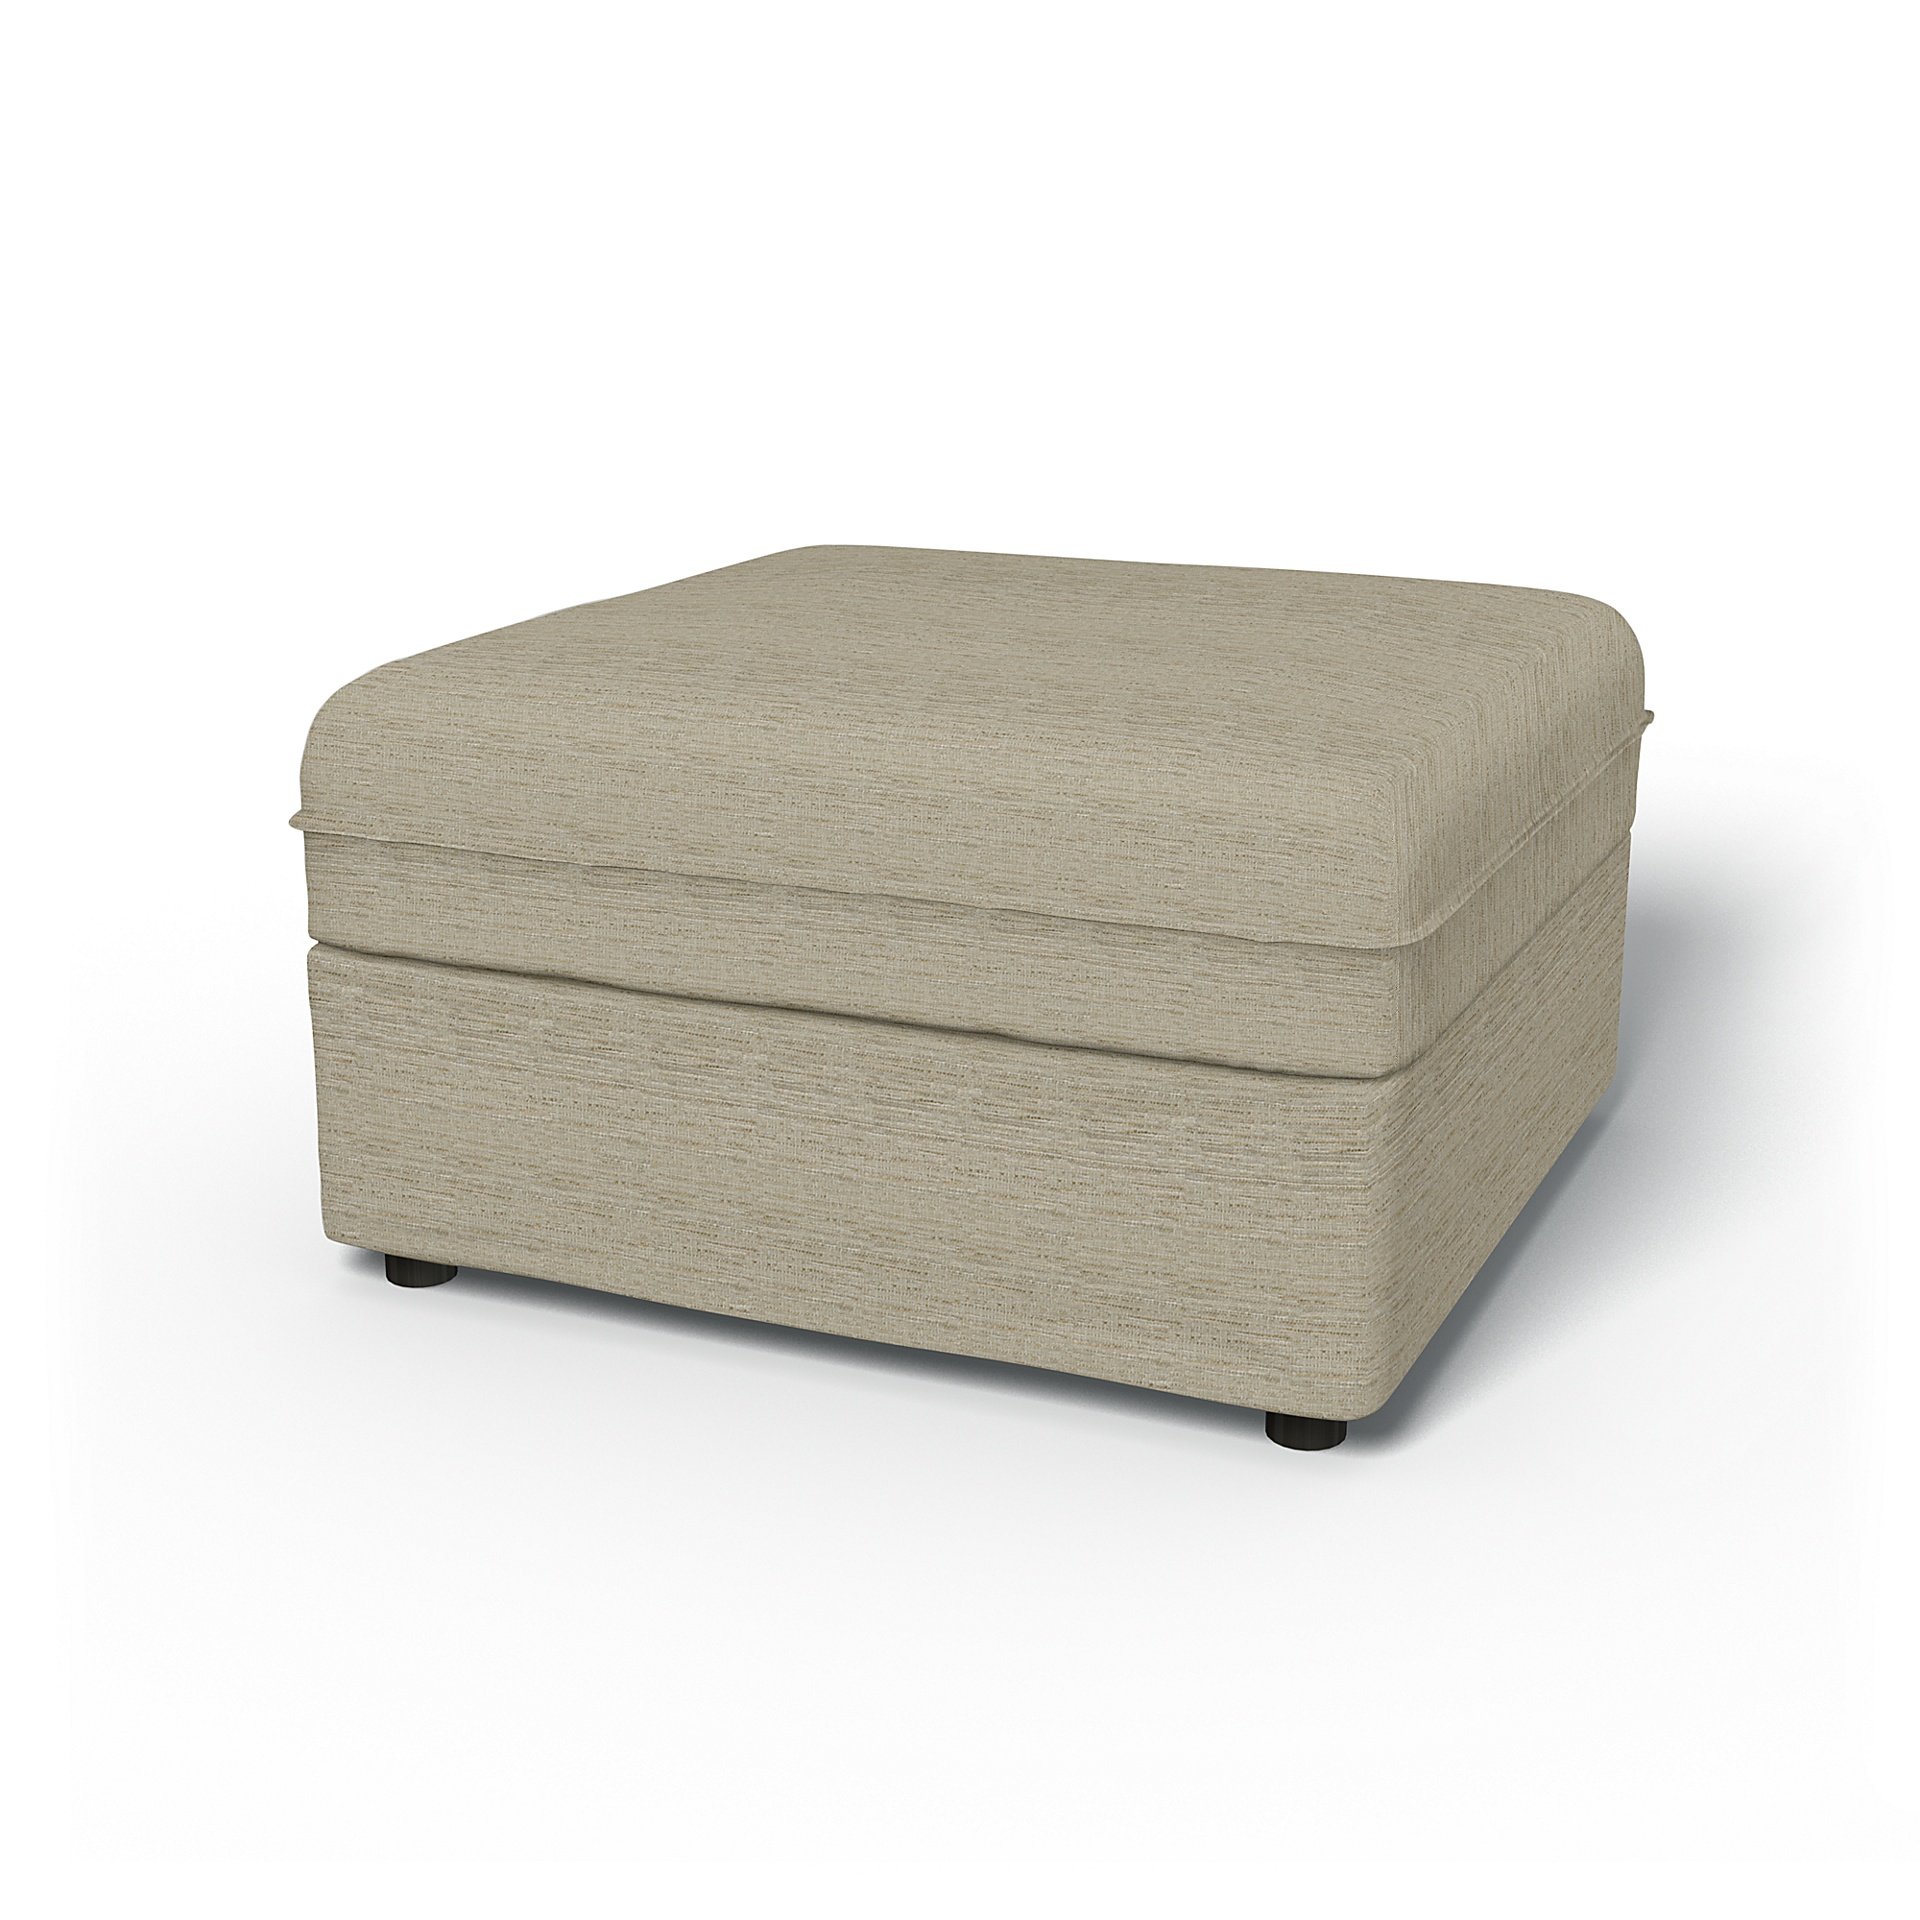 IKEA - Vallentuna Seat Module with Storage Cover 80x80cm 32x32in, Light Sand, Boucle & Texture - Bem